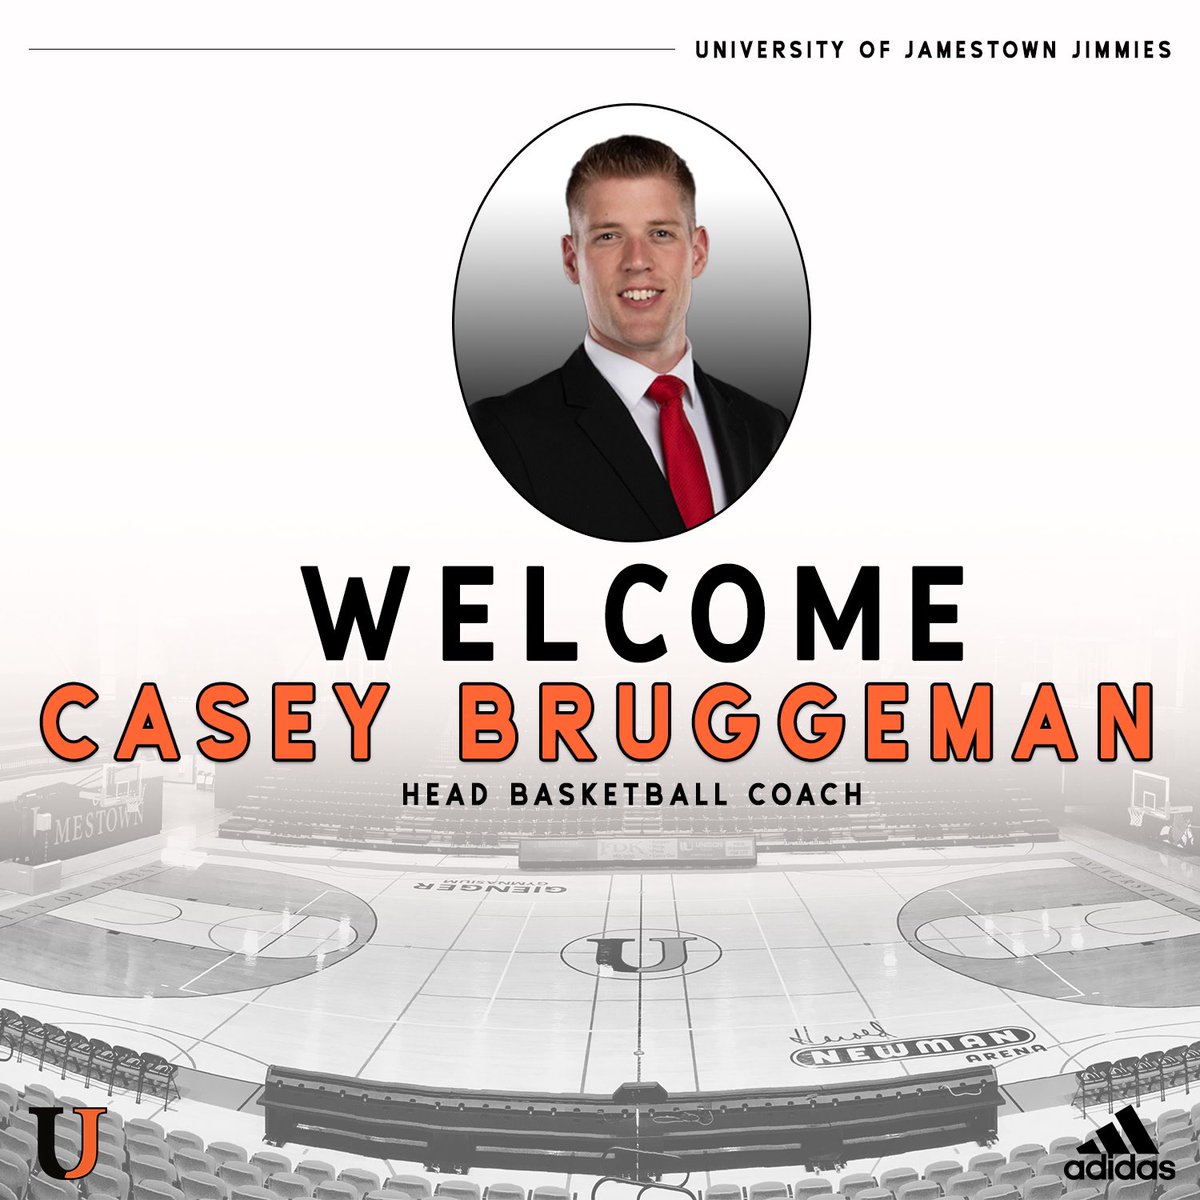 Excited to welcome Casey Bruggeman as the new Head Coach of the University of Jamestown! Full release: jimmiepride.com/x/5y0mz #JimmiePride